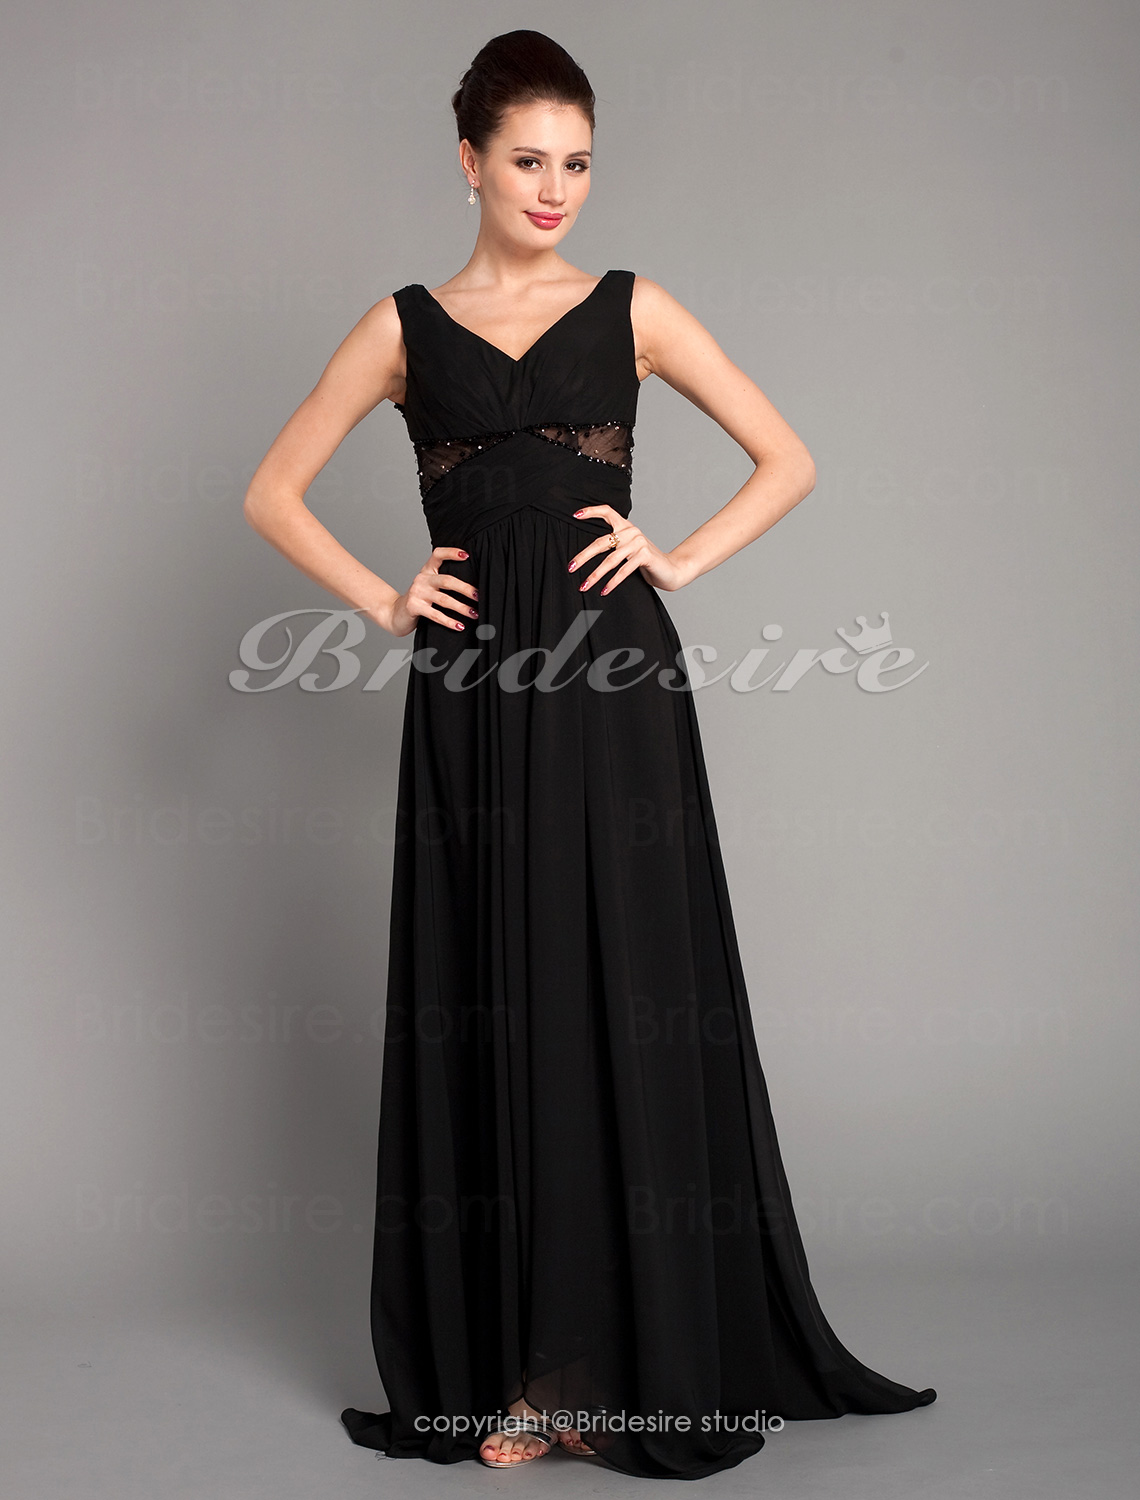 A-line Chiffon Floor-length V-neck Evening Dress inspired by Sex and the City